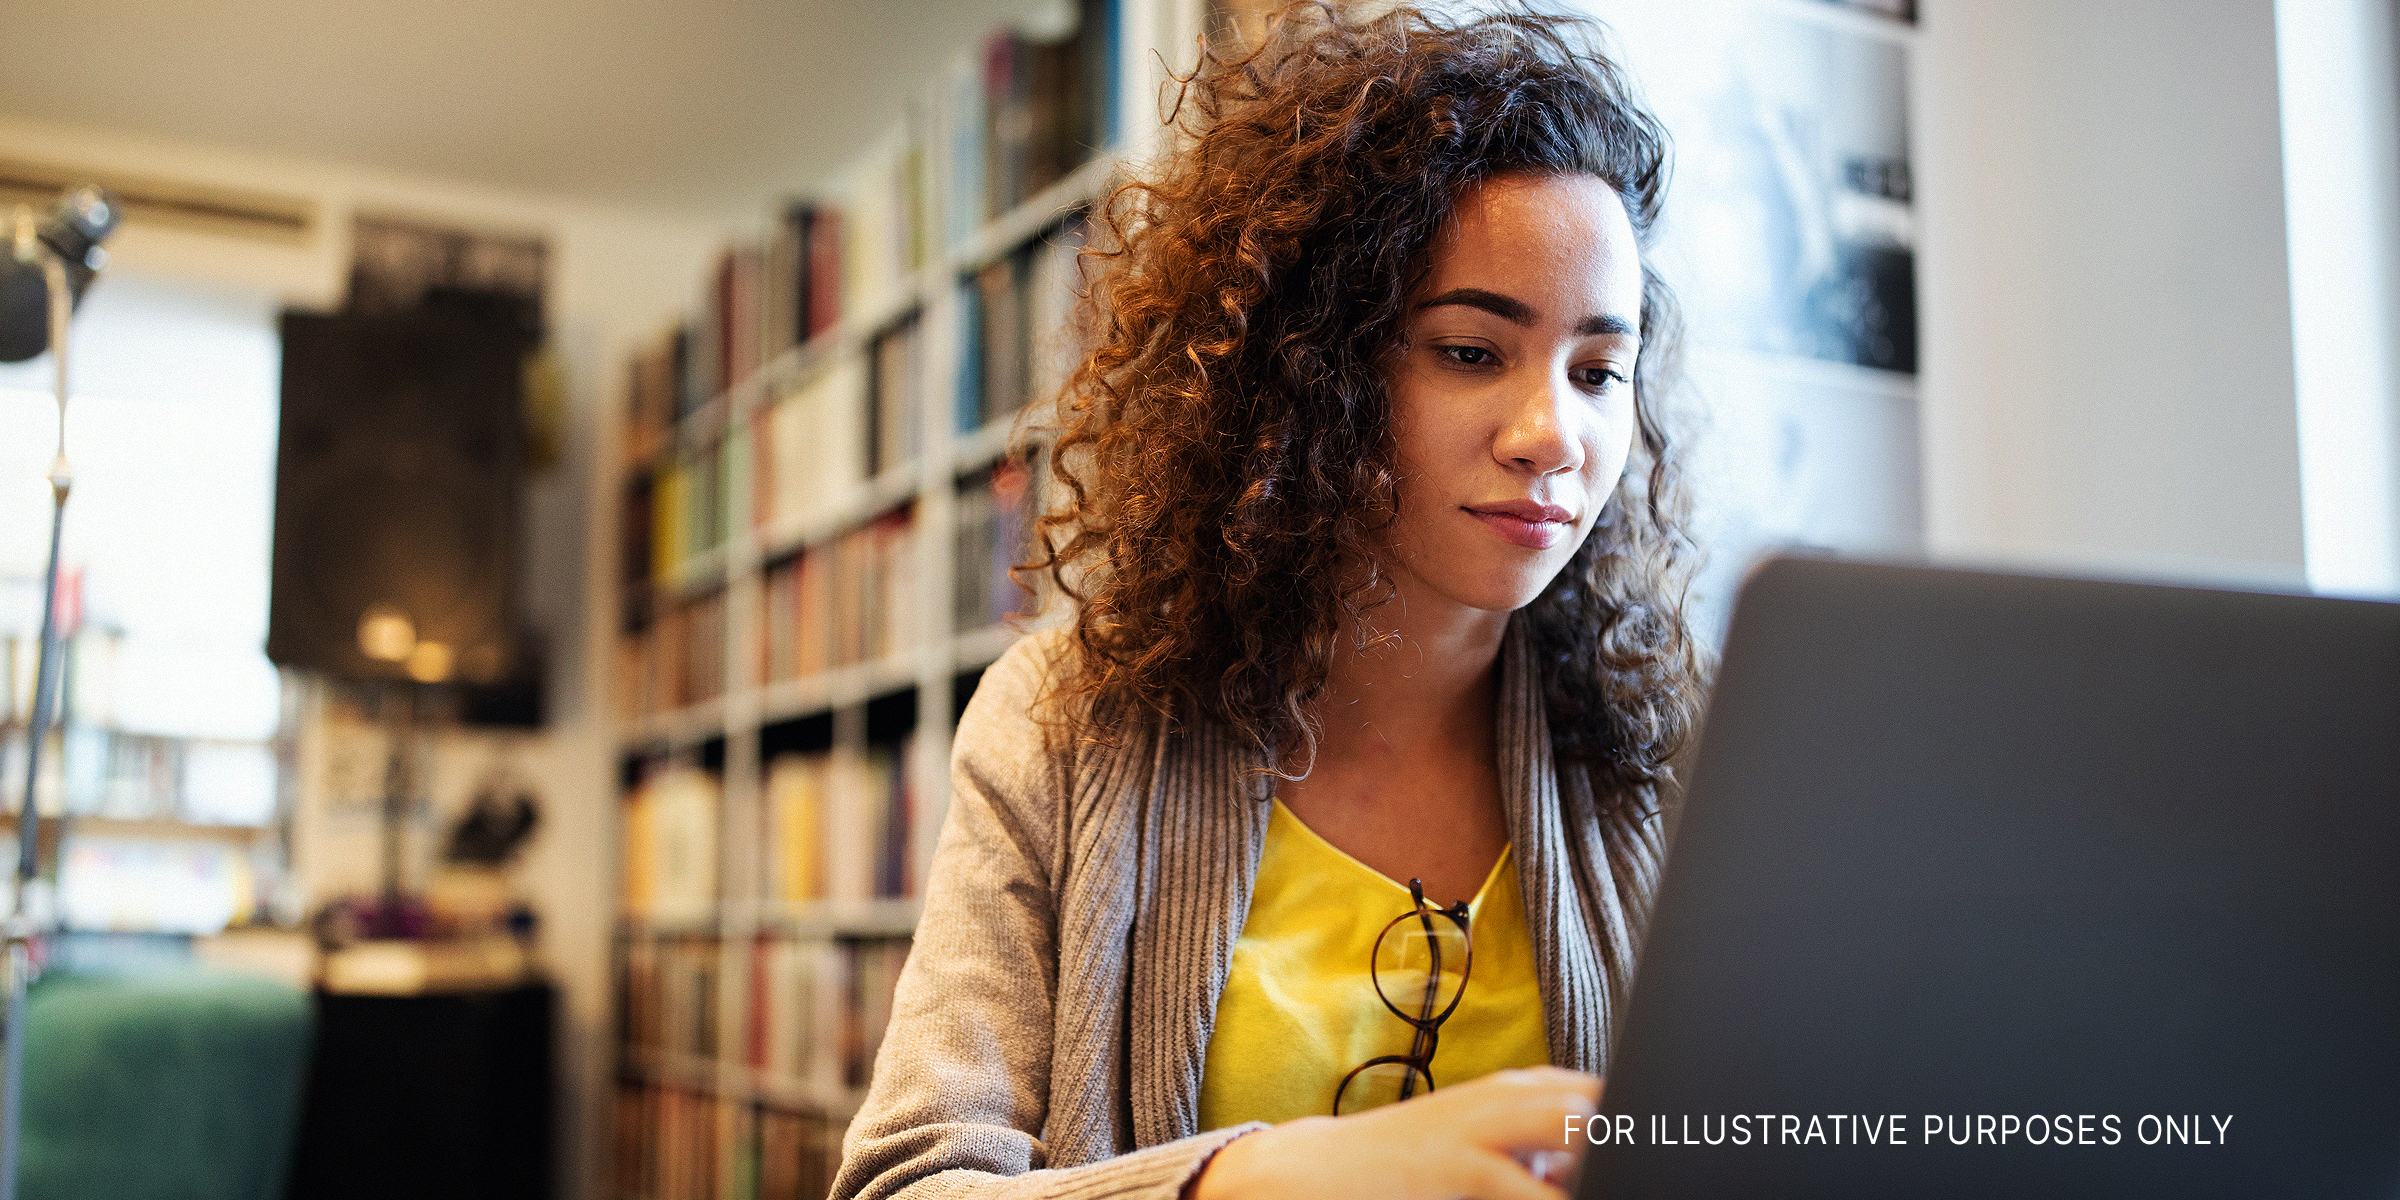 A college student doing research in a library | Source: Shutterstock